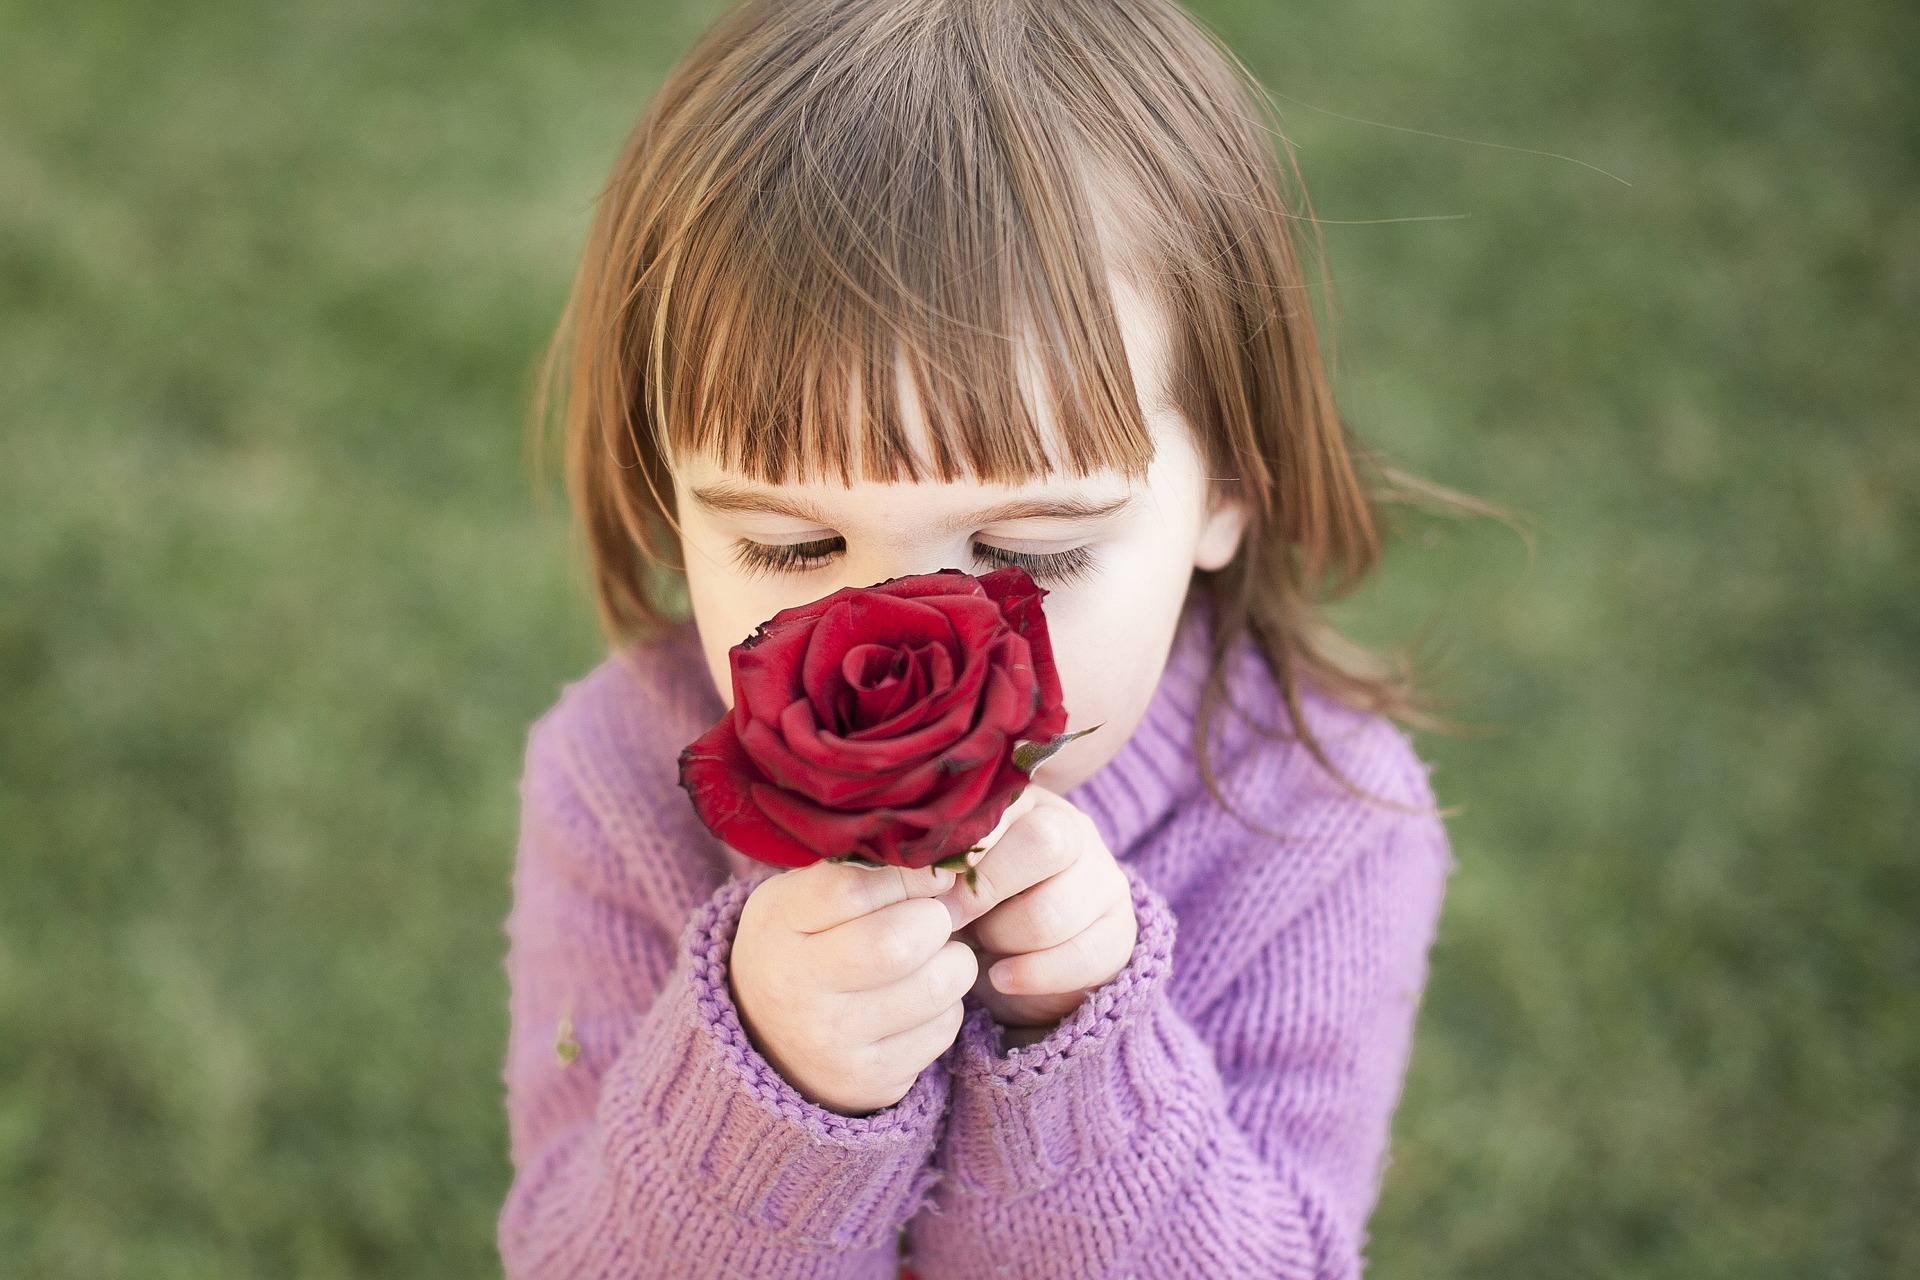 5 ways to explore smell with your child